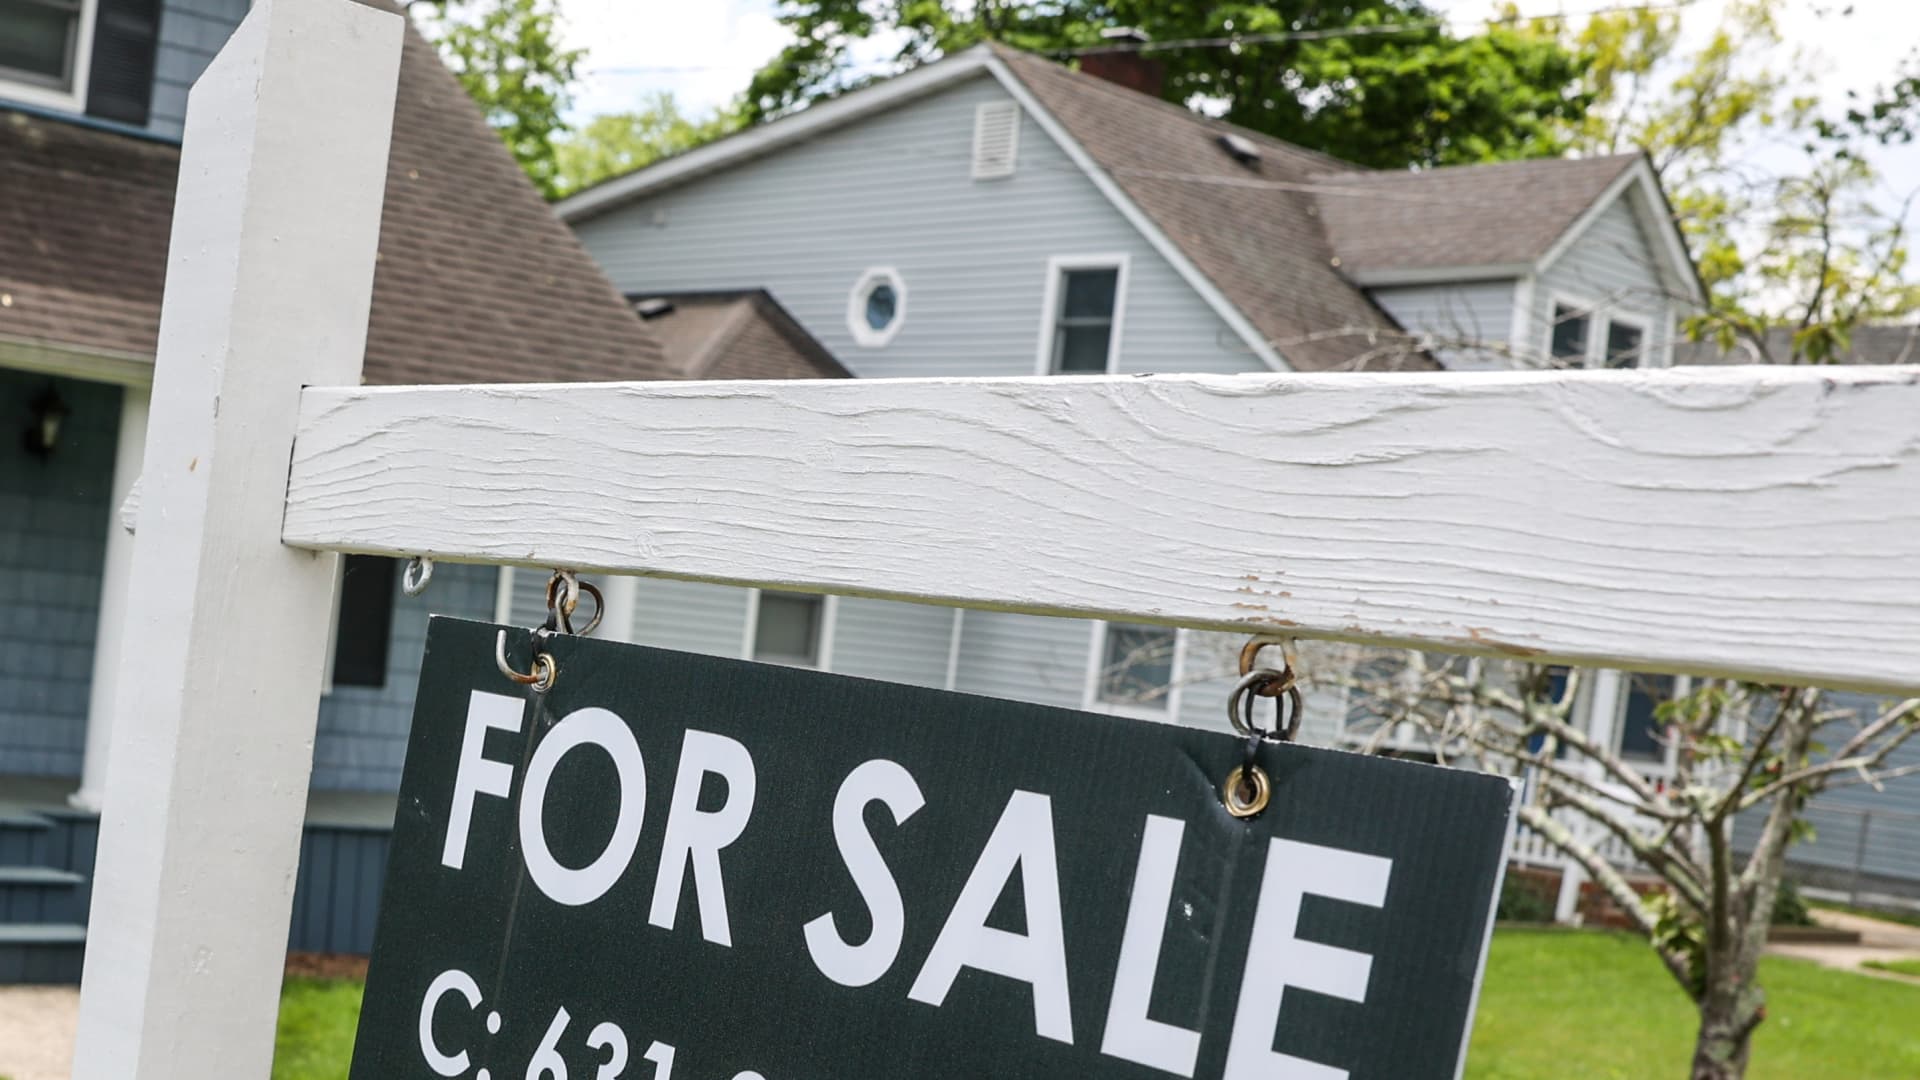 Mortgage rates fall for the third straight week, but demand still drops further - CNBC